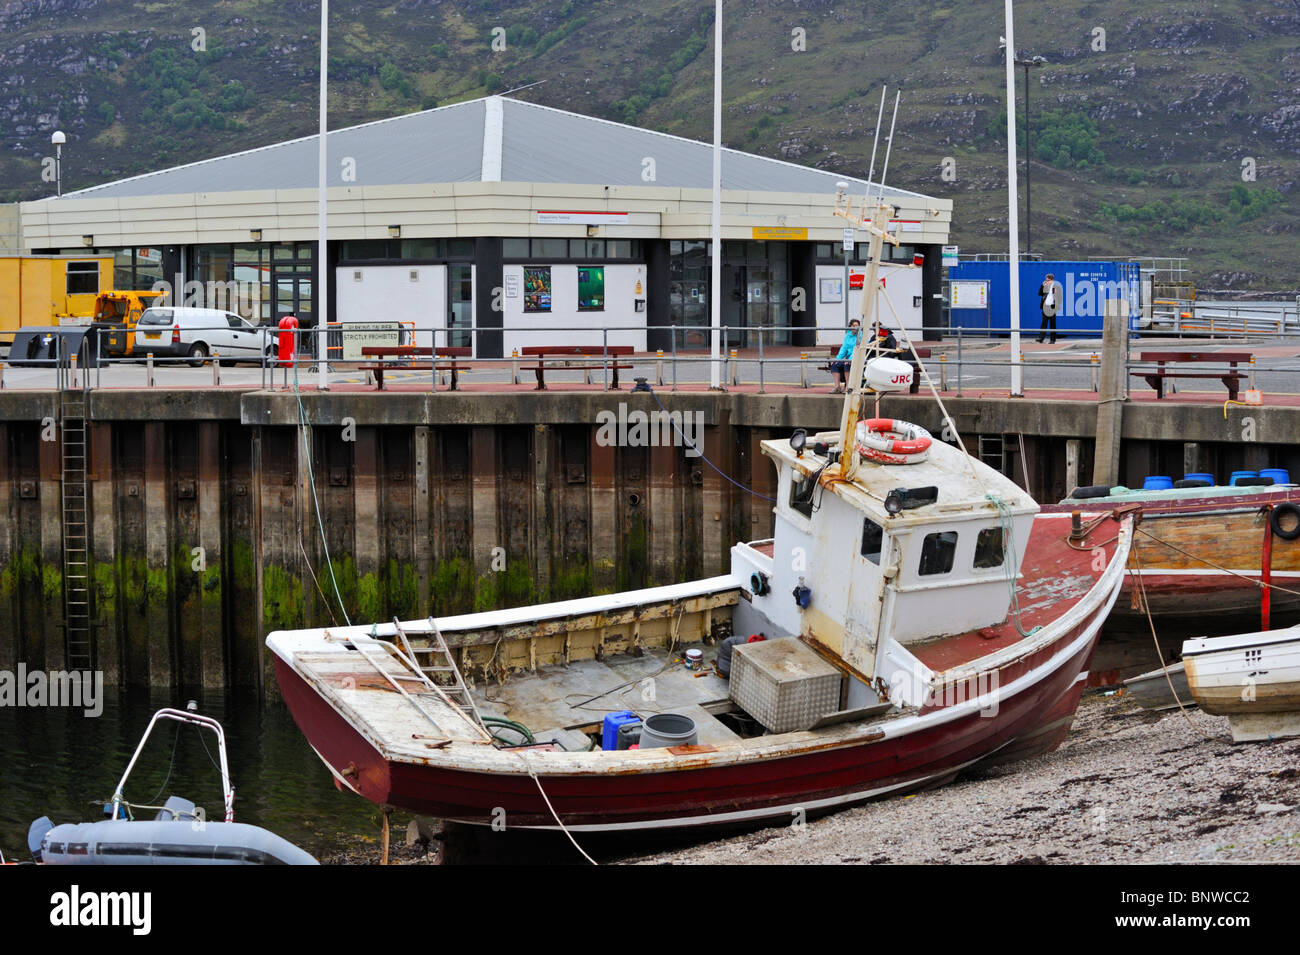 Beached fishing trawler and the Ferry Terminal. Ullapool Harbour. Ullapool, Ross and Cromarty, Scotland, United Kingdom, Europe. Stock Photo